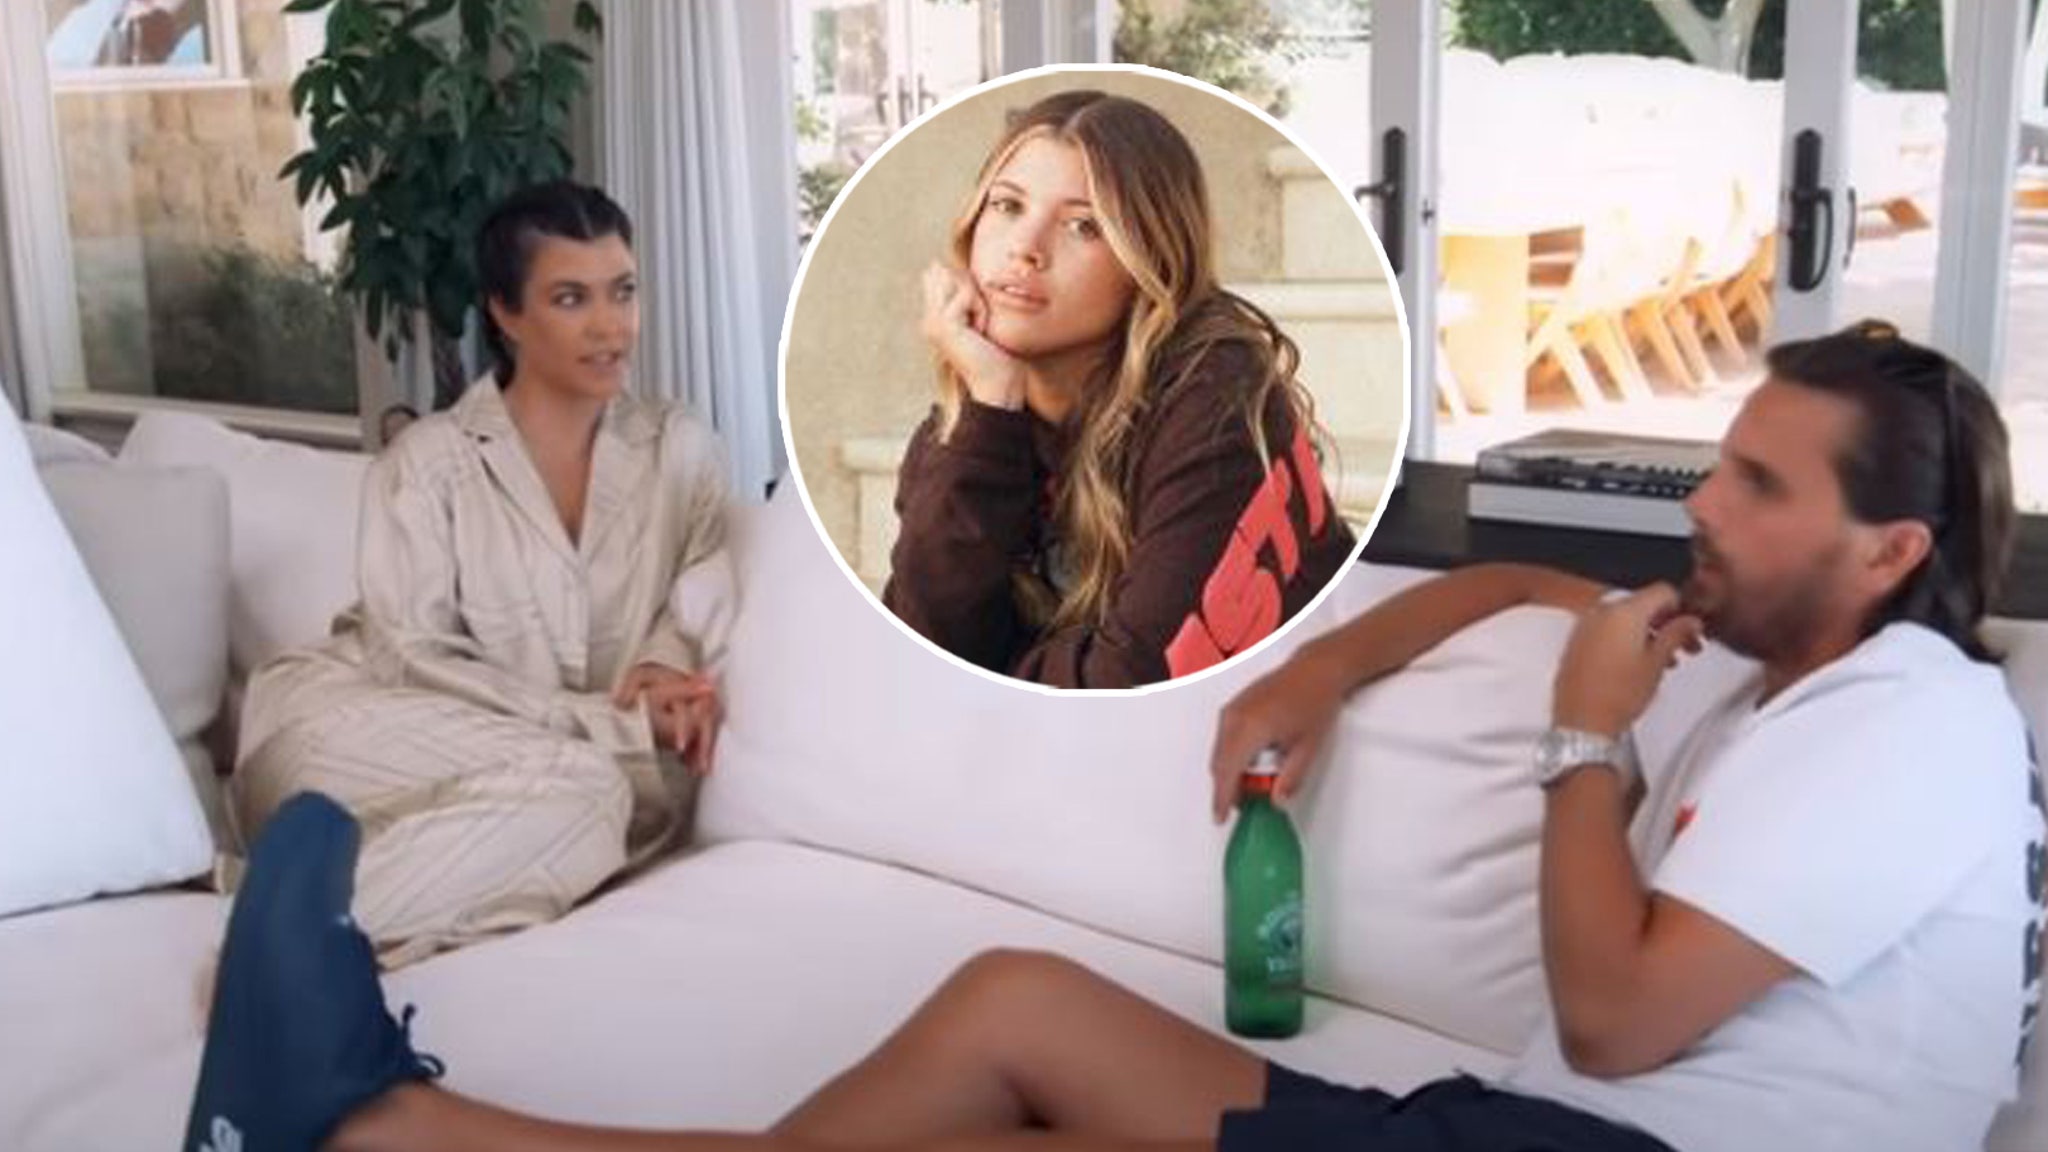 Kourtney and Scott Dish on Sofia Richie, discussing Growing Old ‘Together’